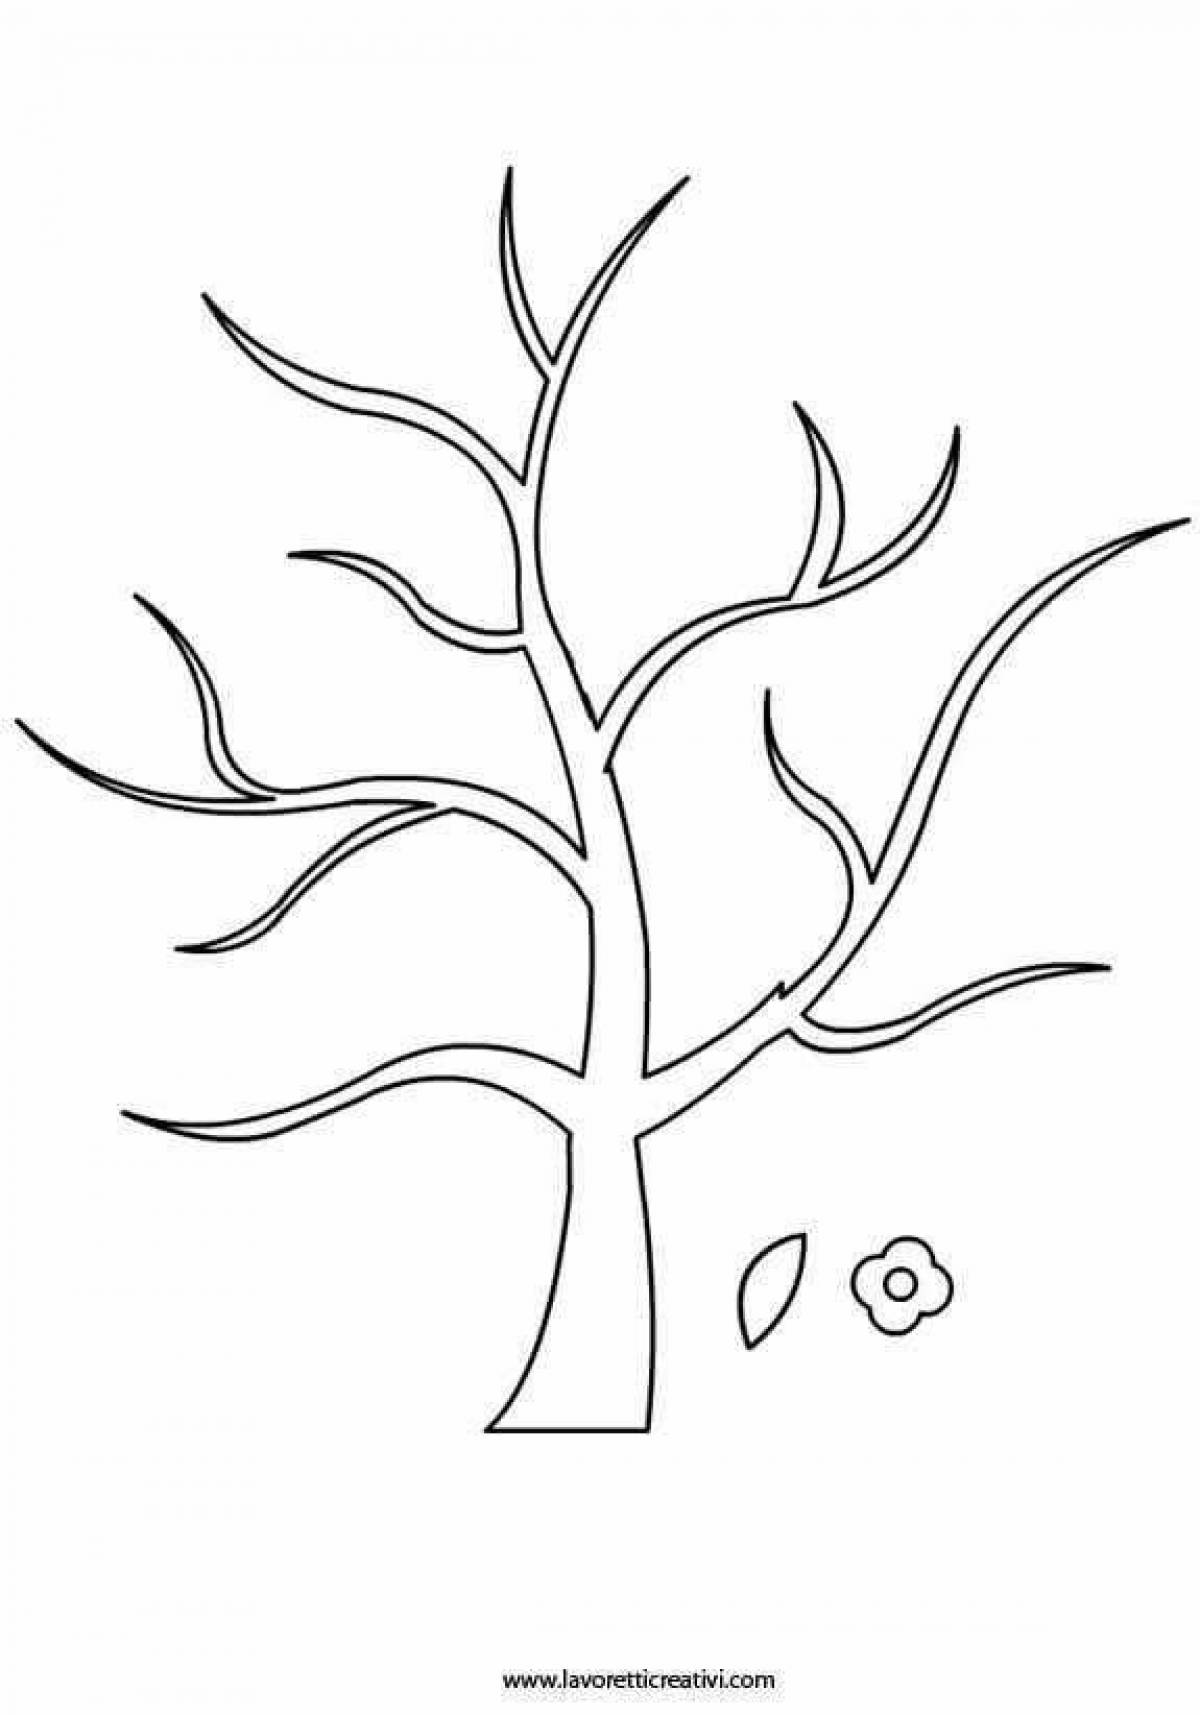 Joyful tree trunk coloring page for kids